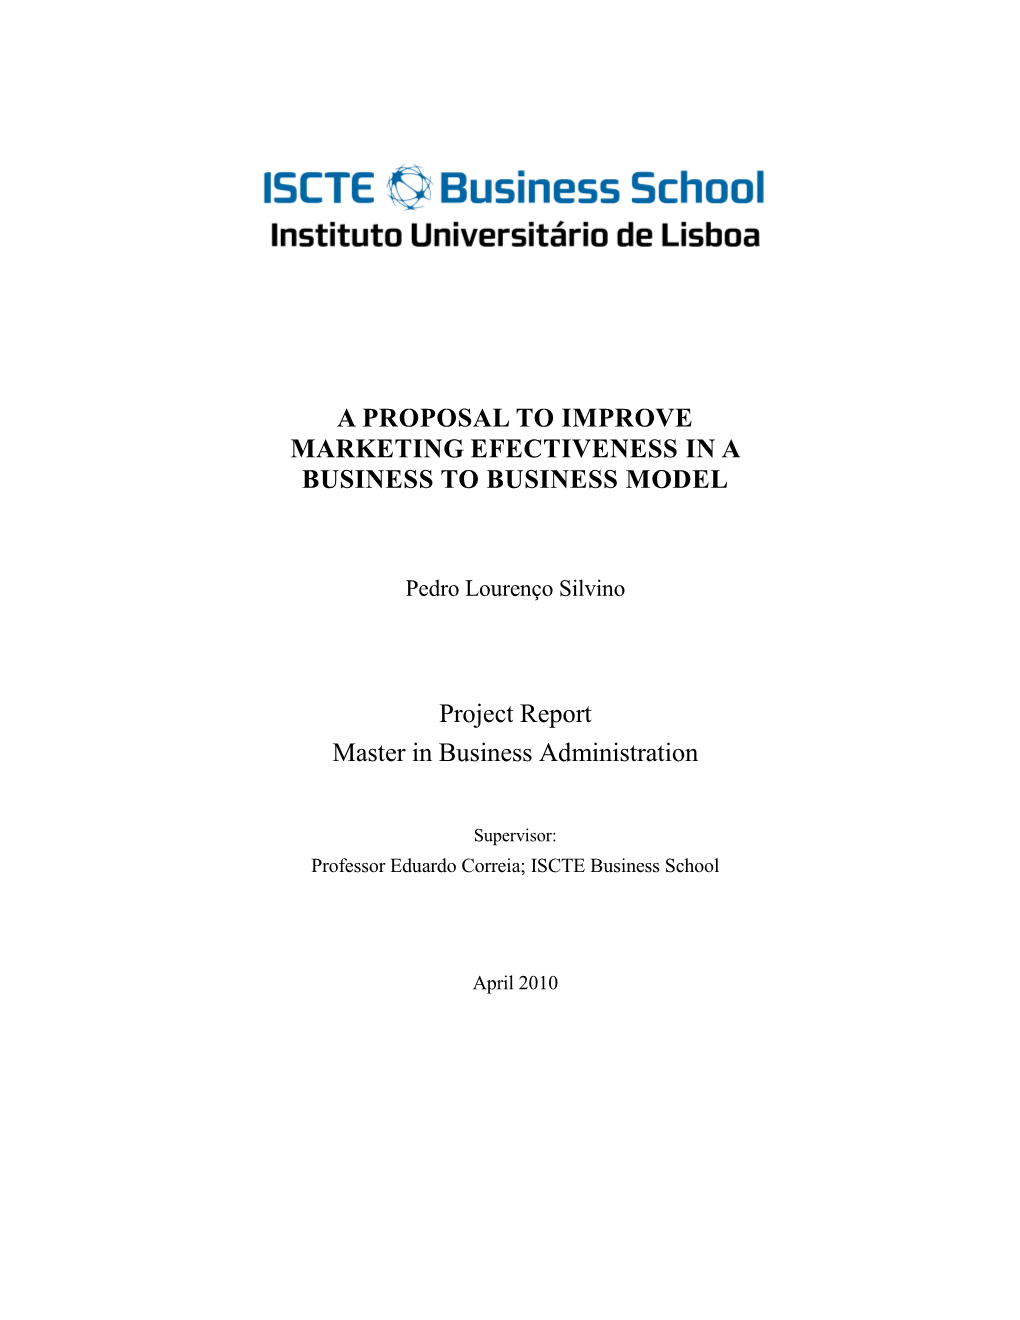 A Proposal to Improve Marketing Efectiveness in a Business to Business Model